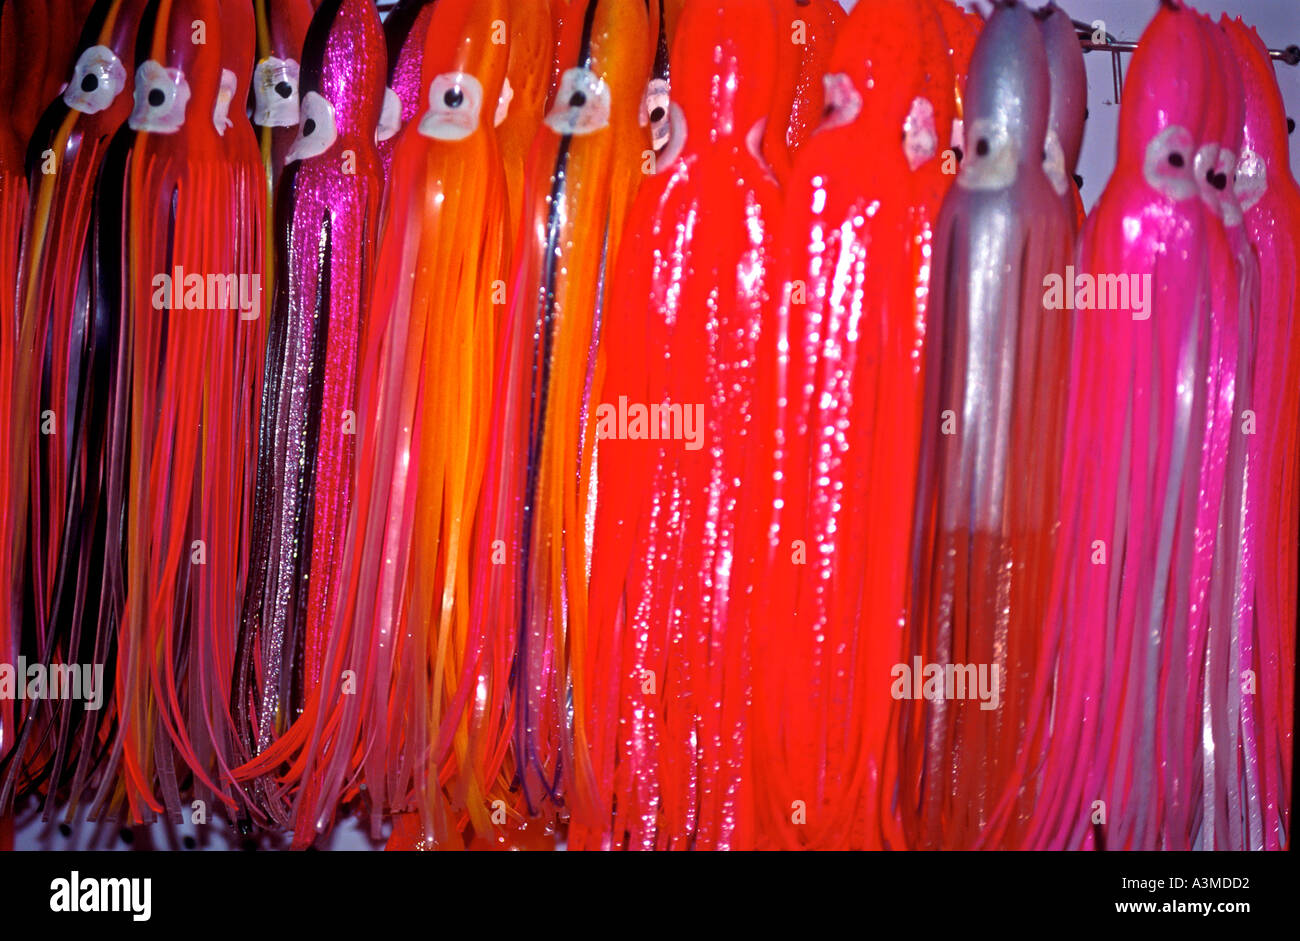 Plastic skirts used in fishing lures Stock Photo